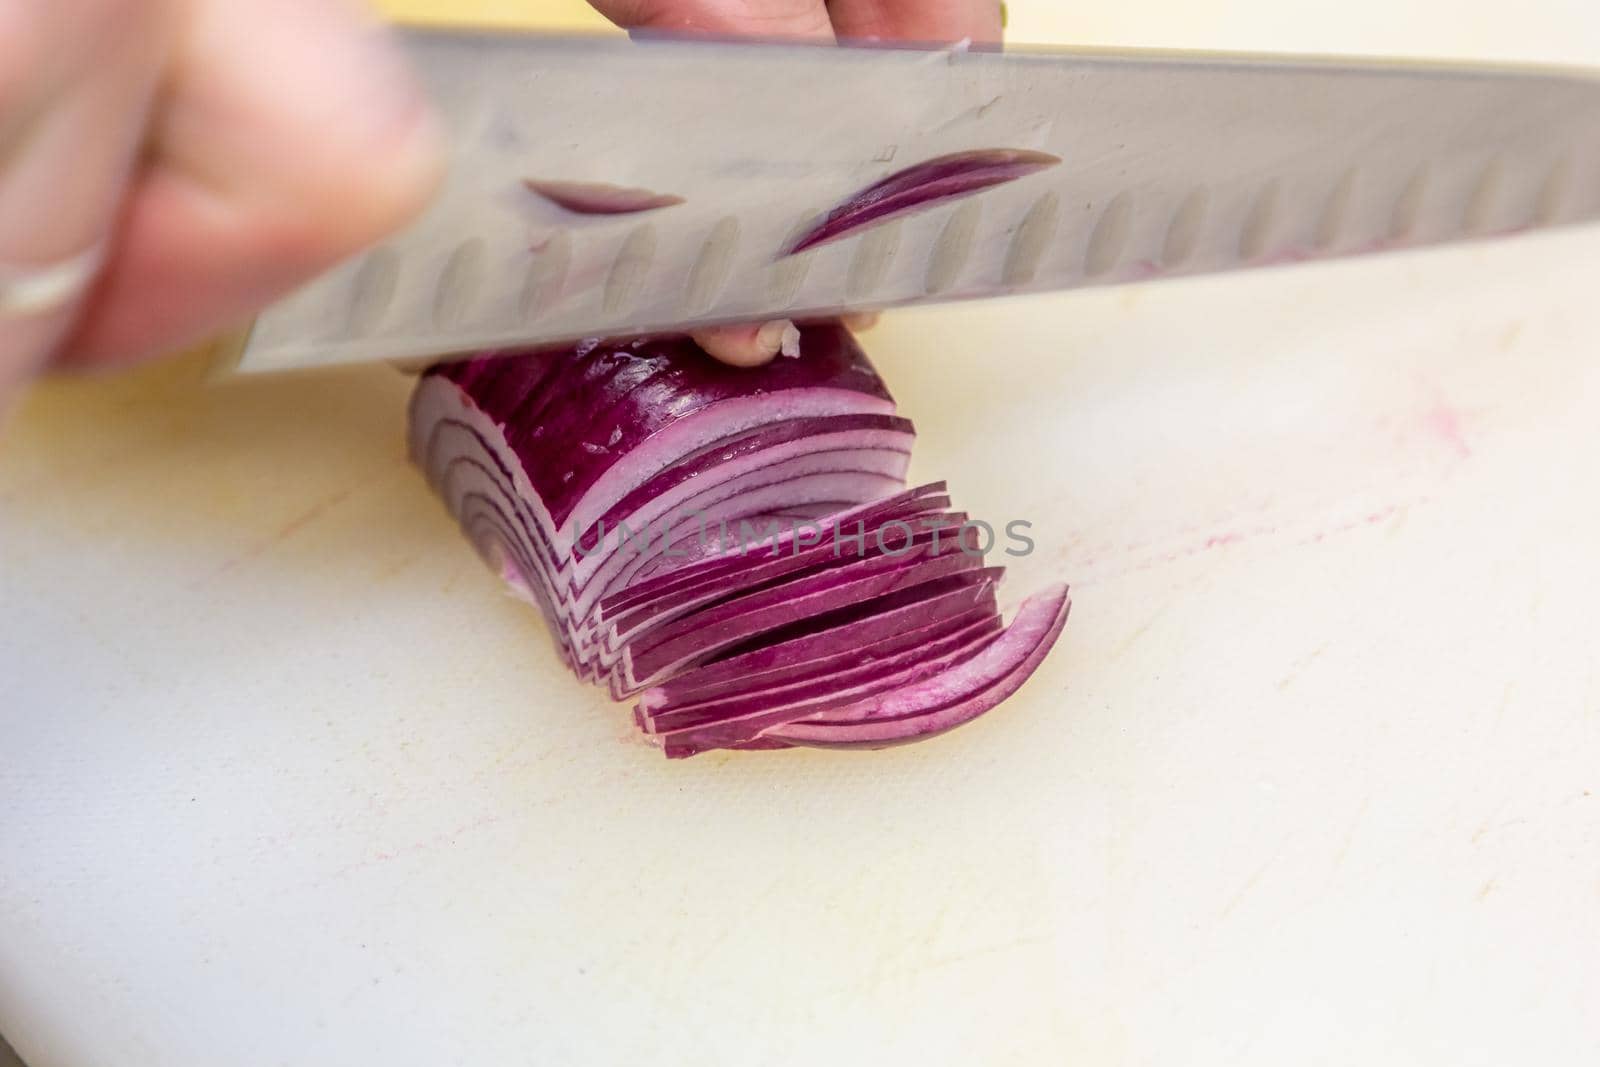 Chef choppig a red onion with a knife on the cutting board, chef at work by Milanchikov